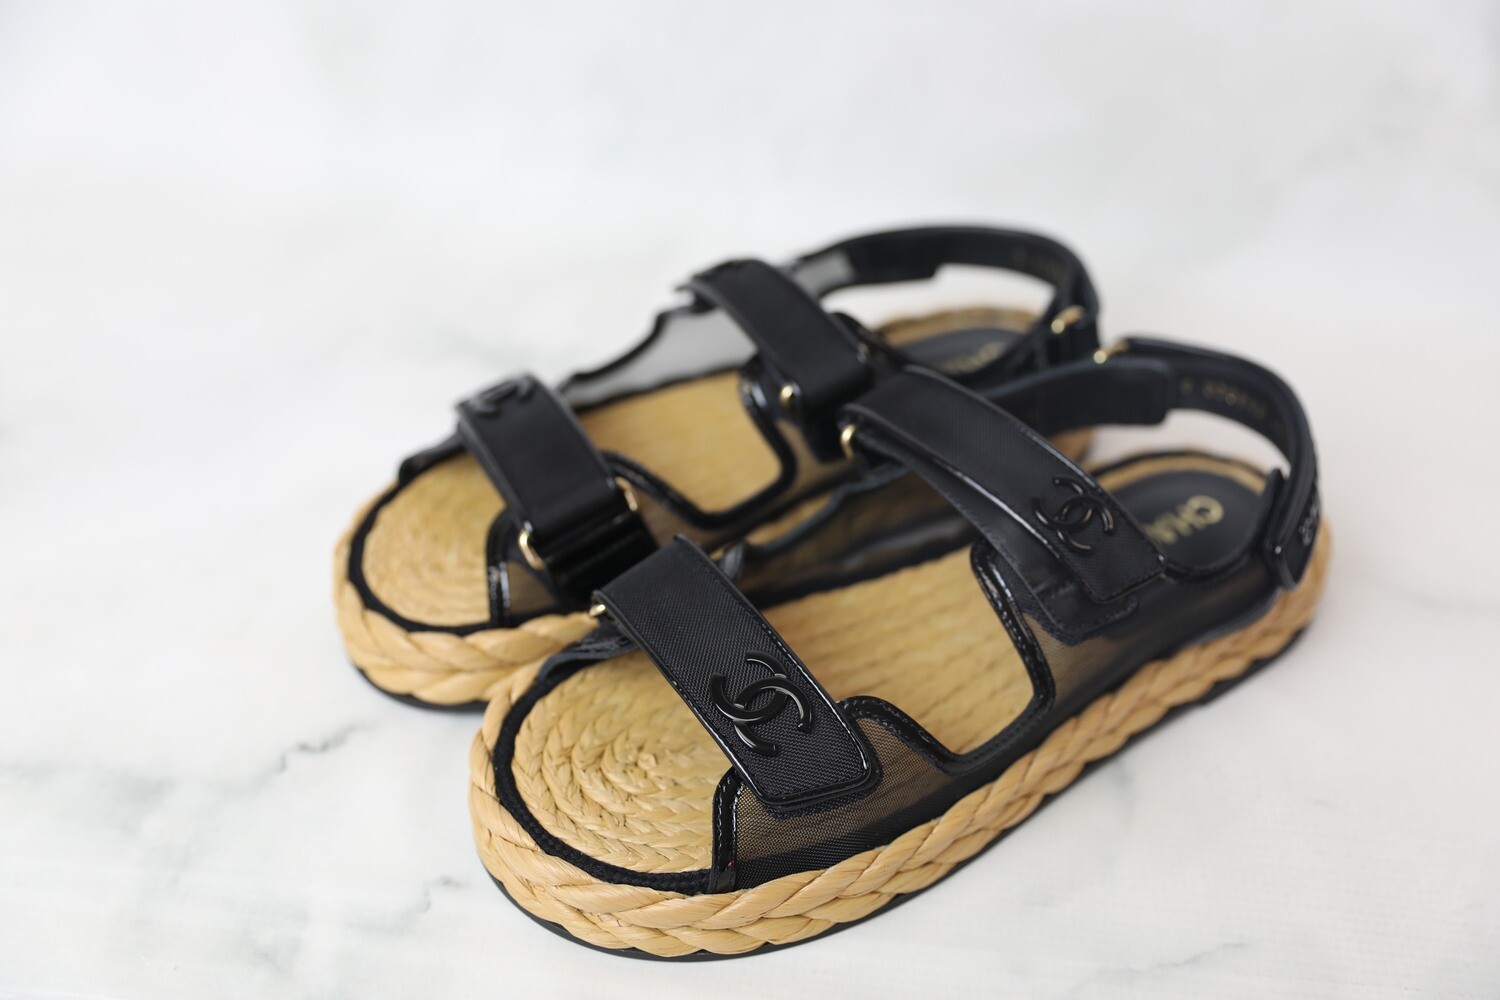 Chanel Gate 5 Dad Sandals, Black Mesh with Patent Trim and Braided Base,  New in Box - Julia Rose Boston | Shop